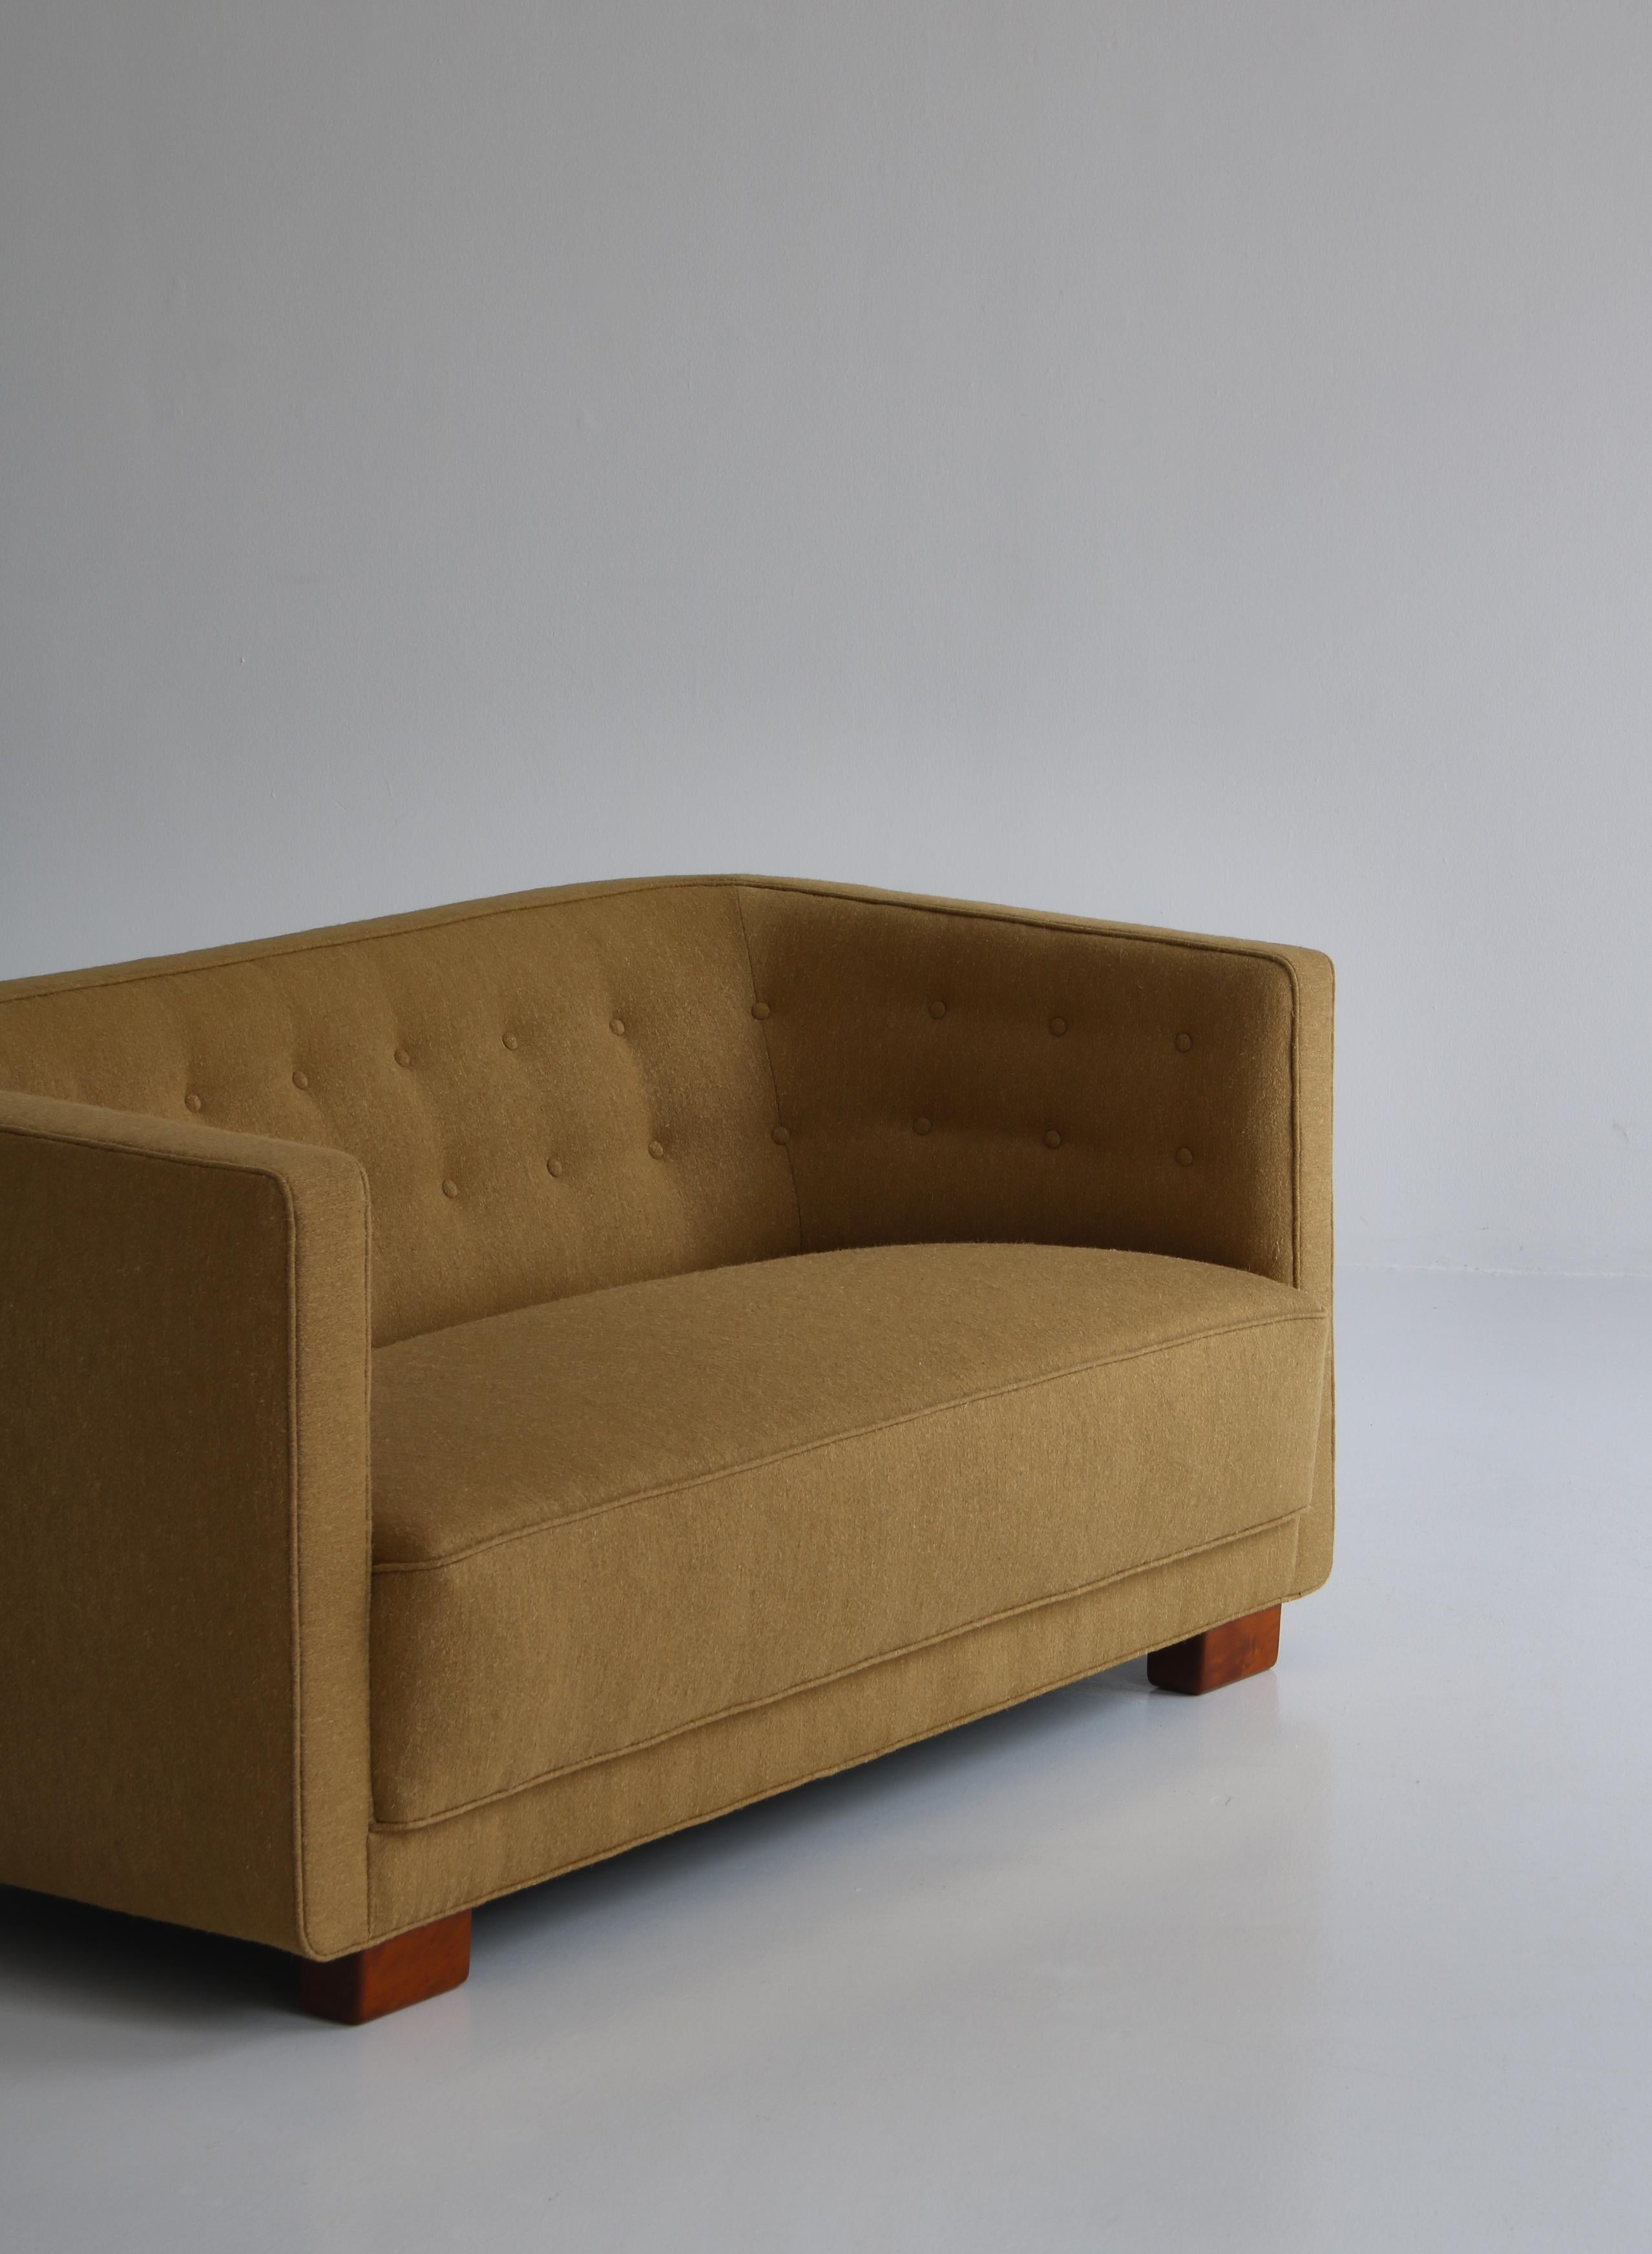 Early 1930s Art Deco Two-Seater Sofa by Flemming Lassen, Denmark For Sale 2